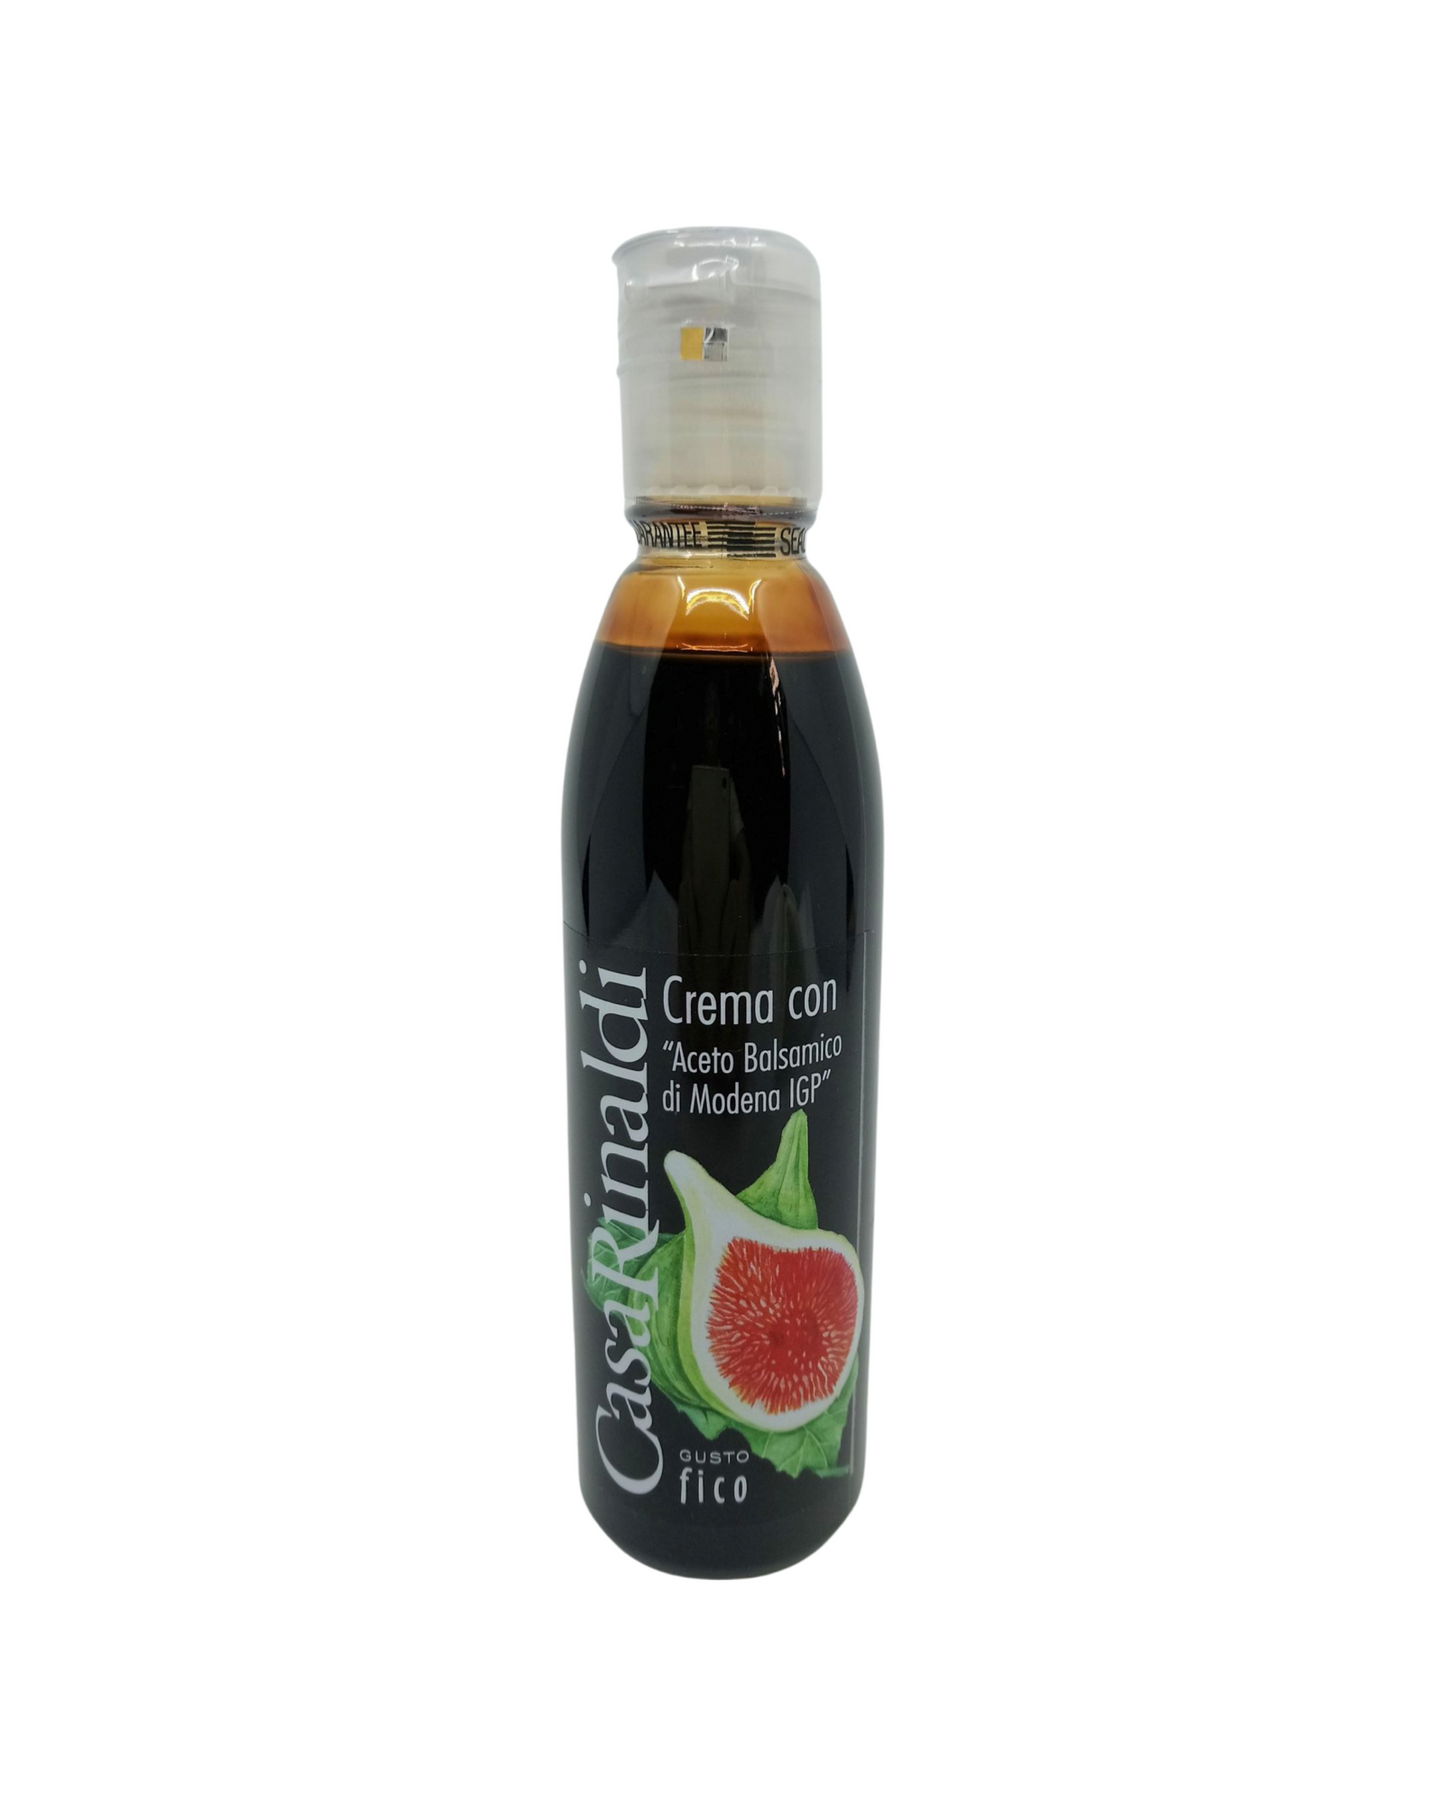 Balsamic cream with fig (250ml)